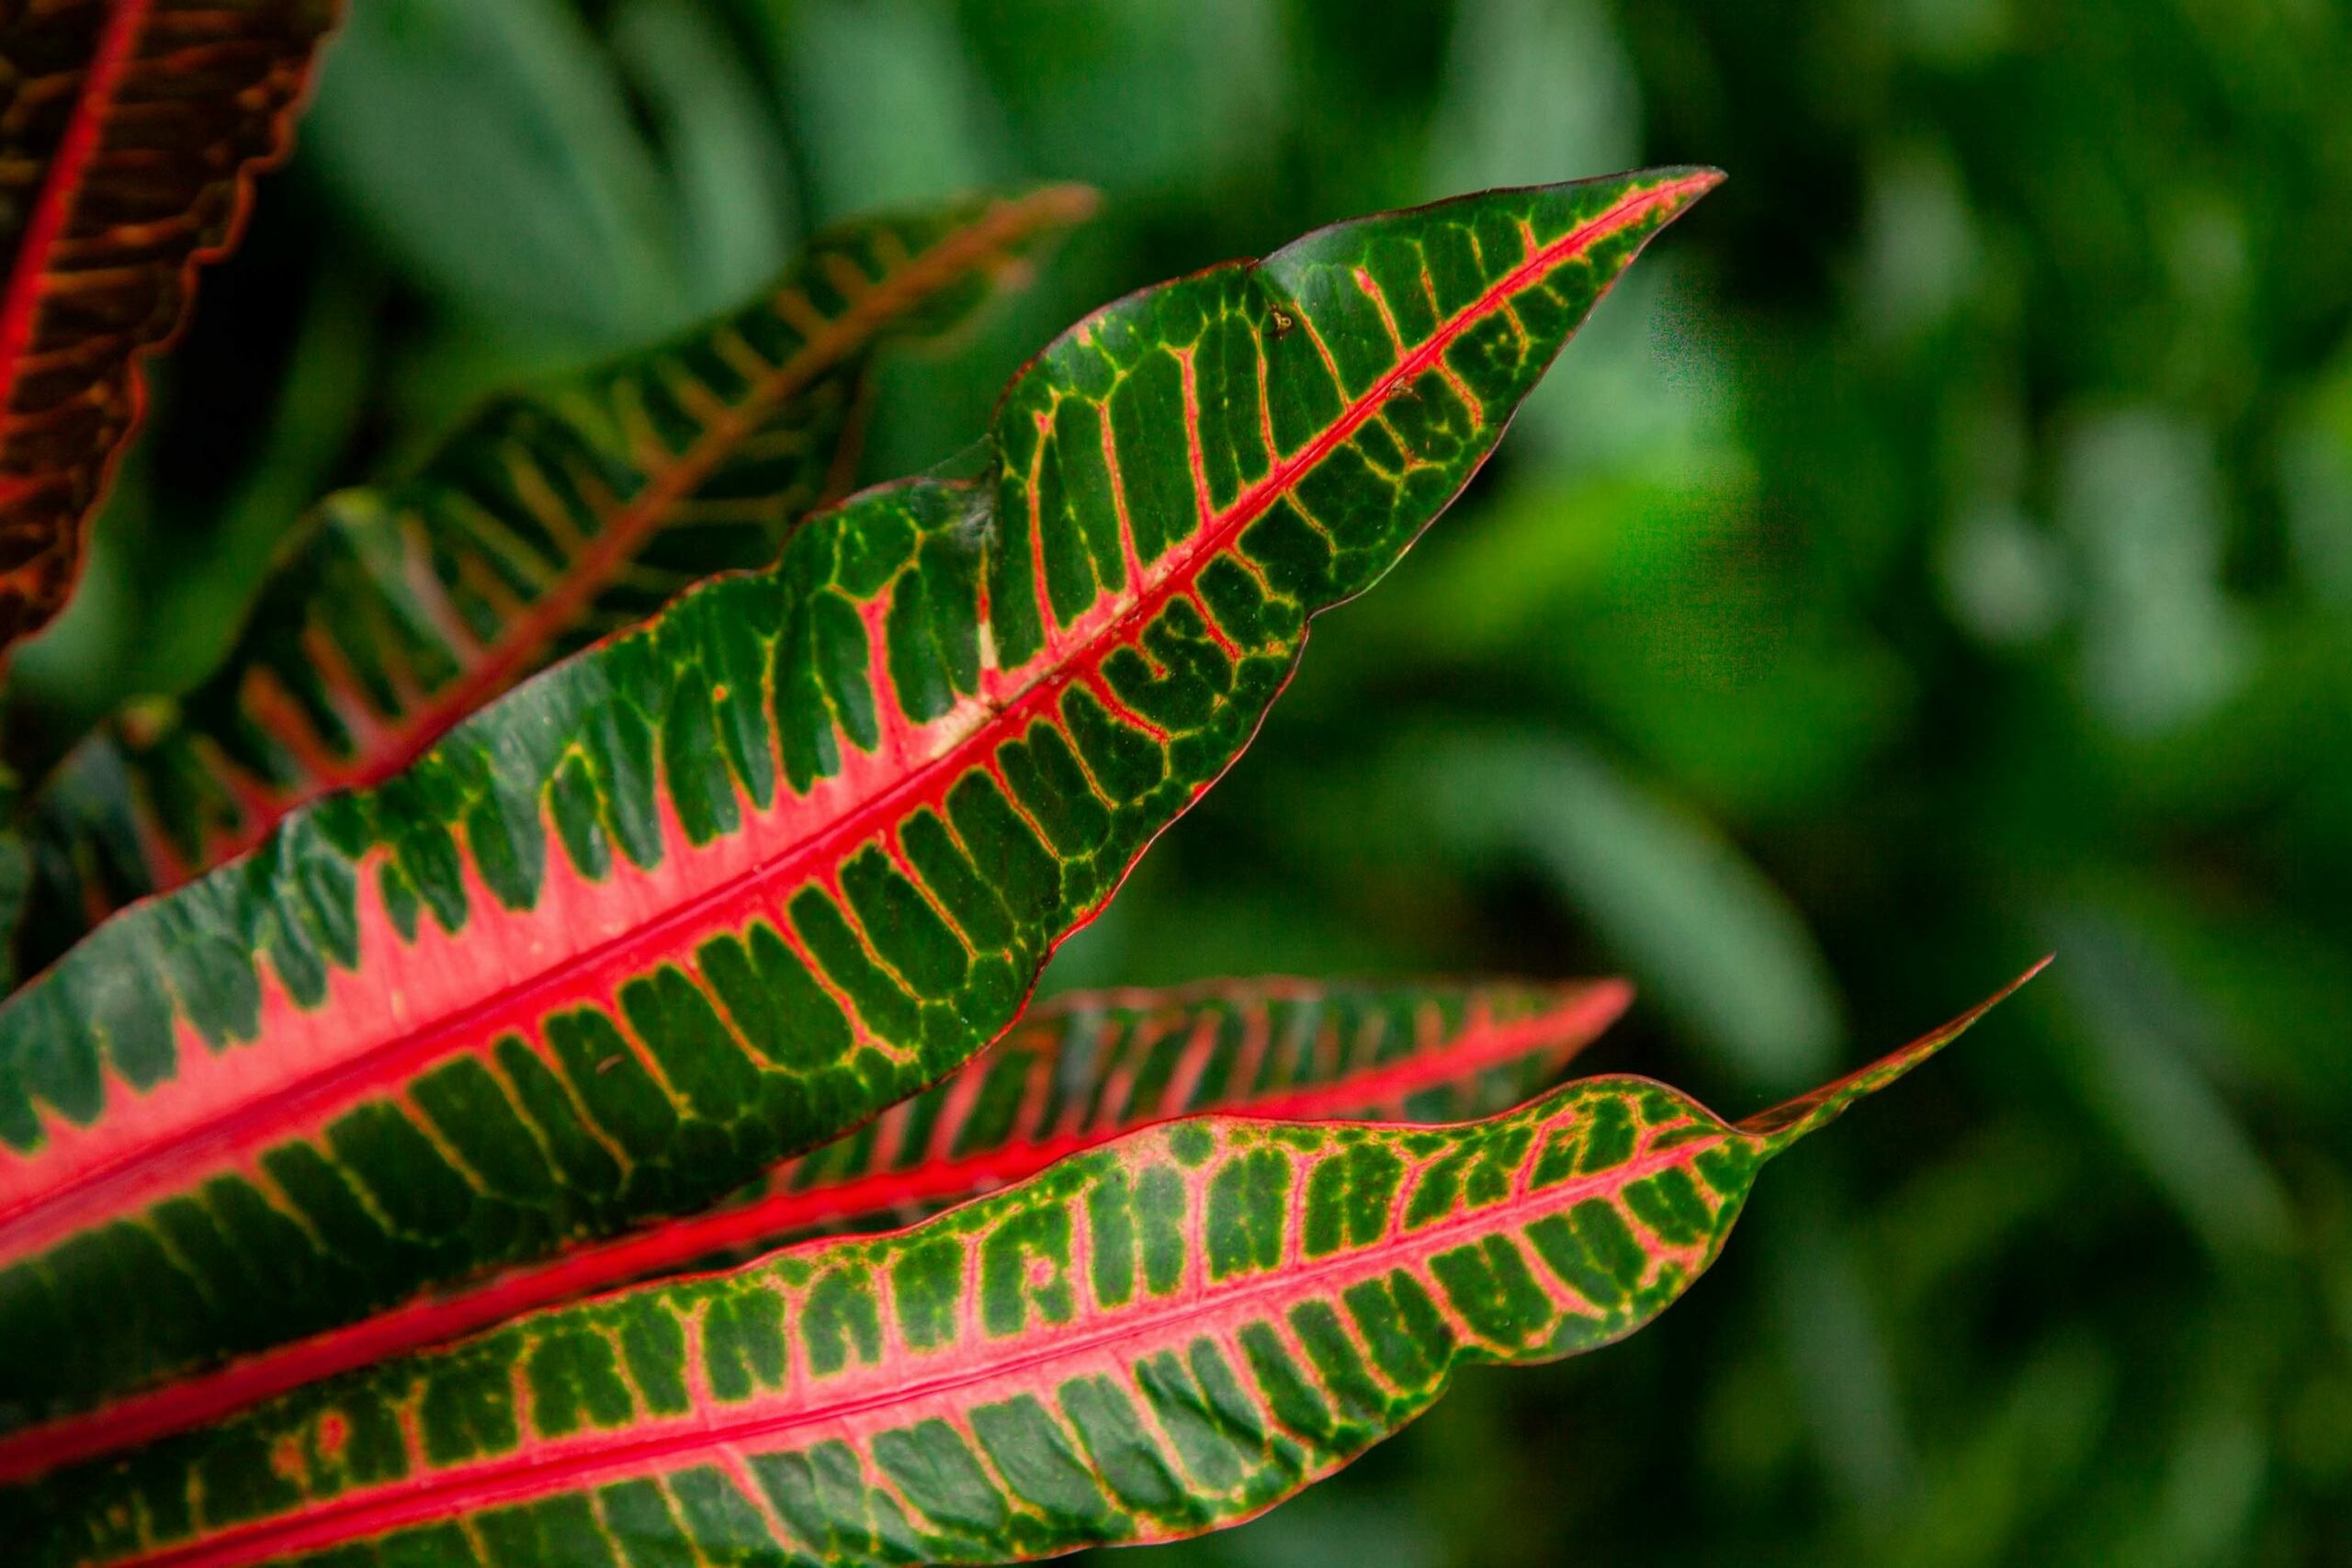 A nature photograph showcasing a green leaf with prominent crimson-red veins in the foreground, set against a blurred background of lush green foliage, highlighting the leaf's intricate beauty.